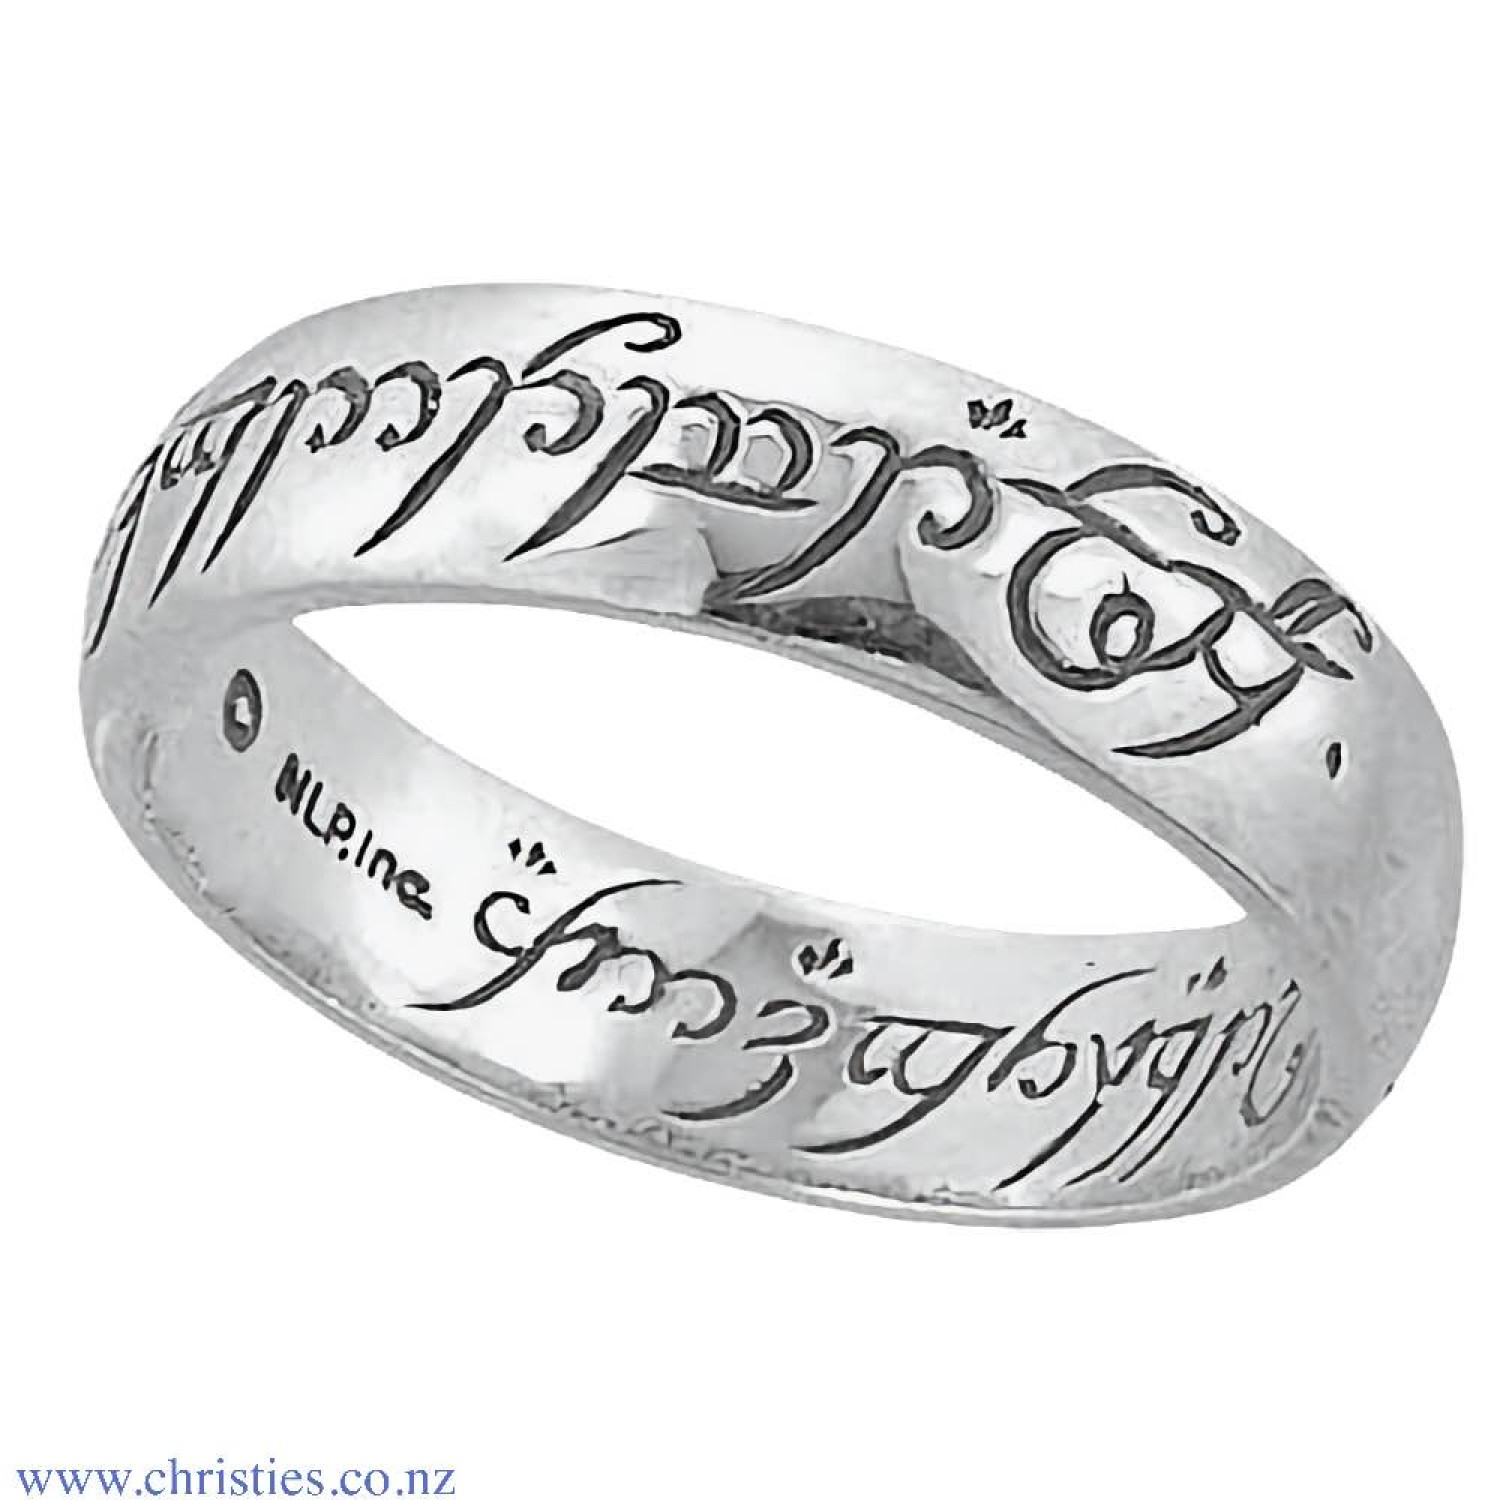 Lord of the Rings One Ring In Sterling Silver. One ring to rule them all, One ring to find them, One ring to bring them all and in the darkness bind them. Engraved with Elvish Runes in black anodised Elvish Script. The only Official Lord Of The Rings Ring